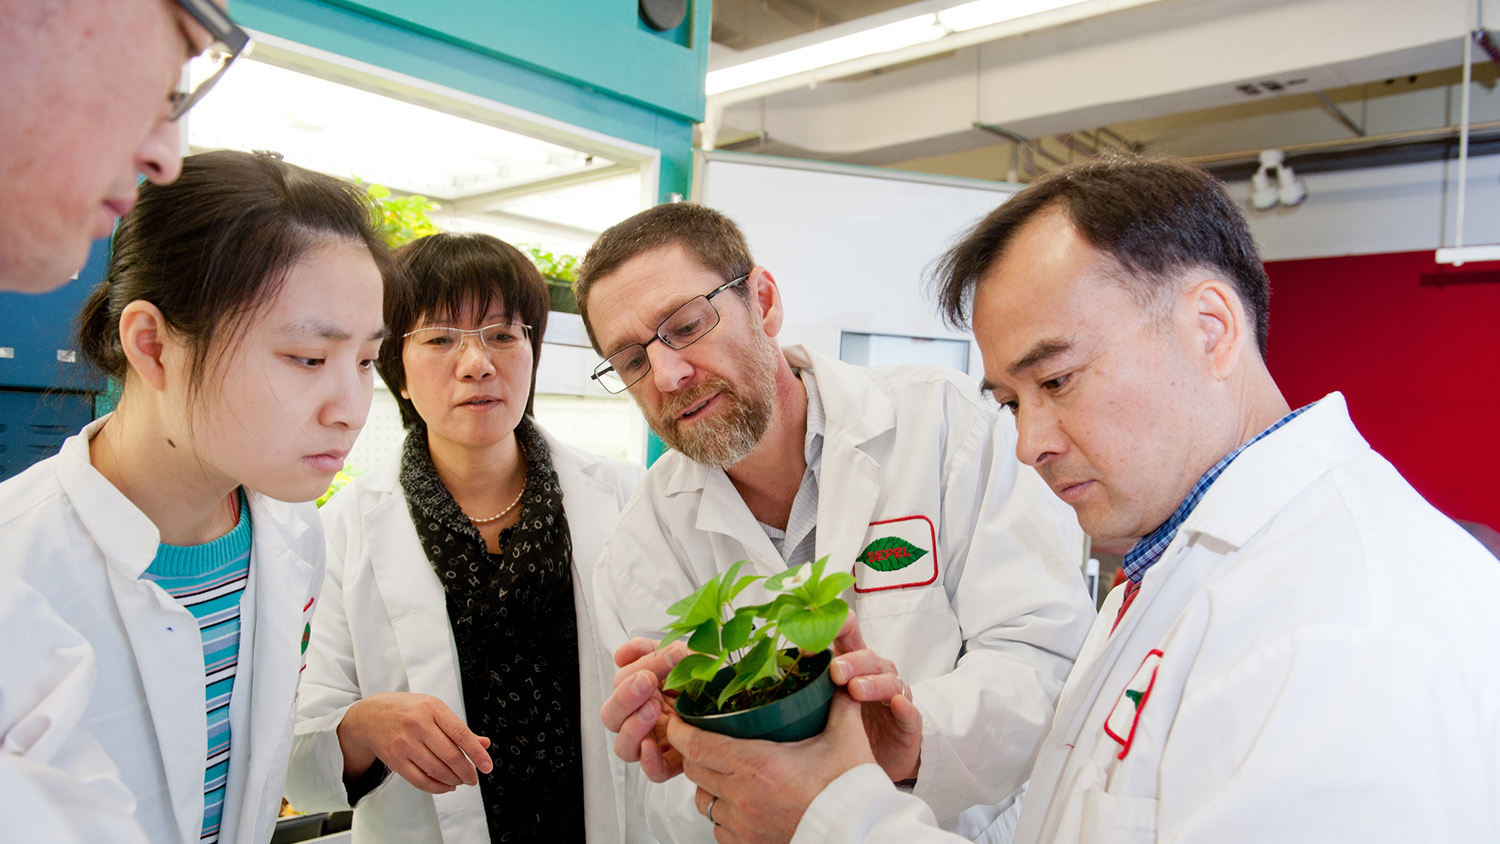 Five NC&#160;State College of Agriculture and Life Sciences researchers examine a small dogwood plant in a pot in a laboratory setting.